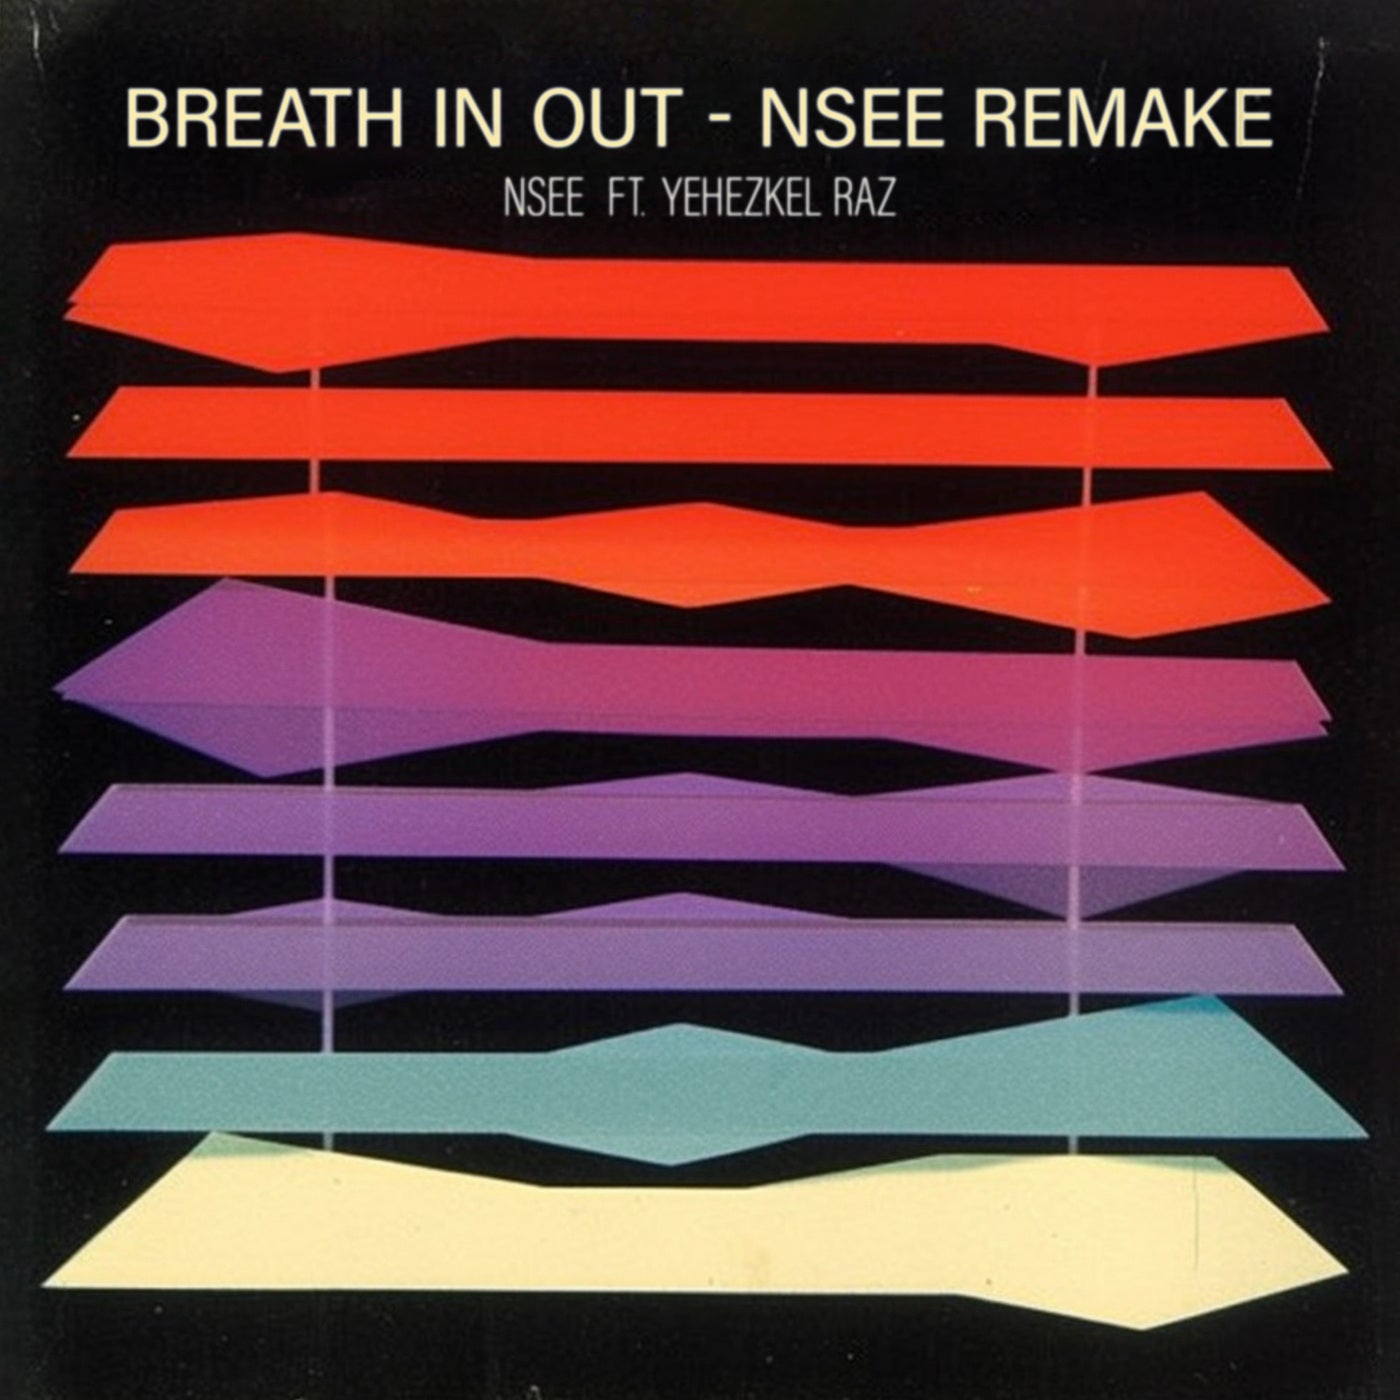 Breath In Out - Nsee Remake